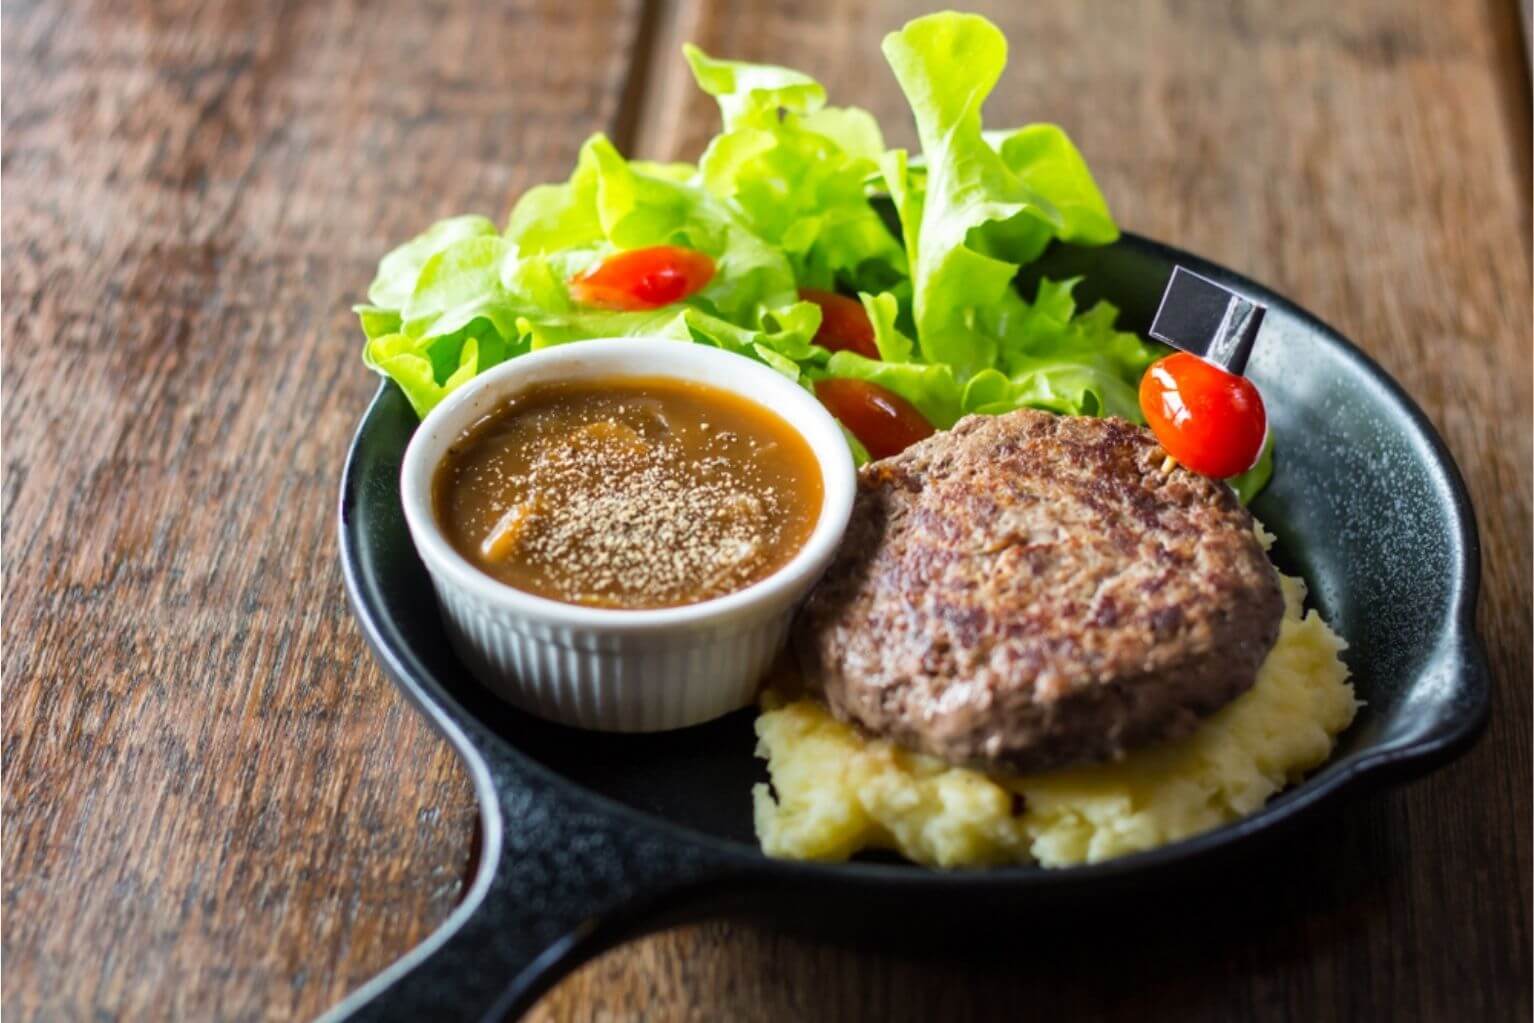 Cooking skillet filled with mashed potatoes, a beef patty, a side salad and a white cup full of low carb gravy, all sitting on a wooden table.